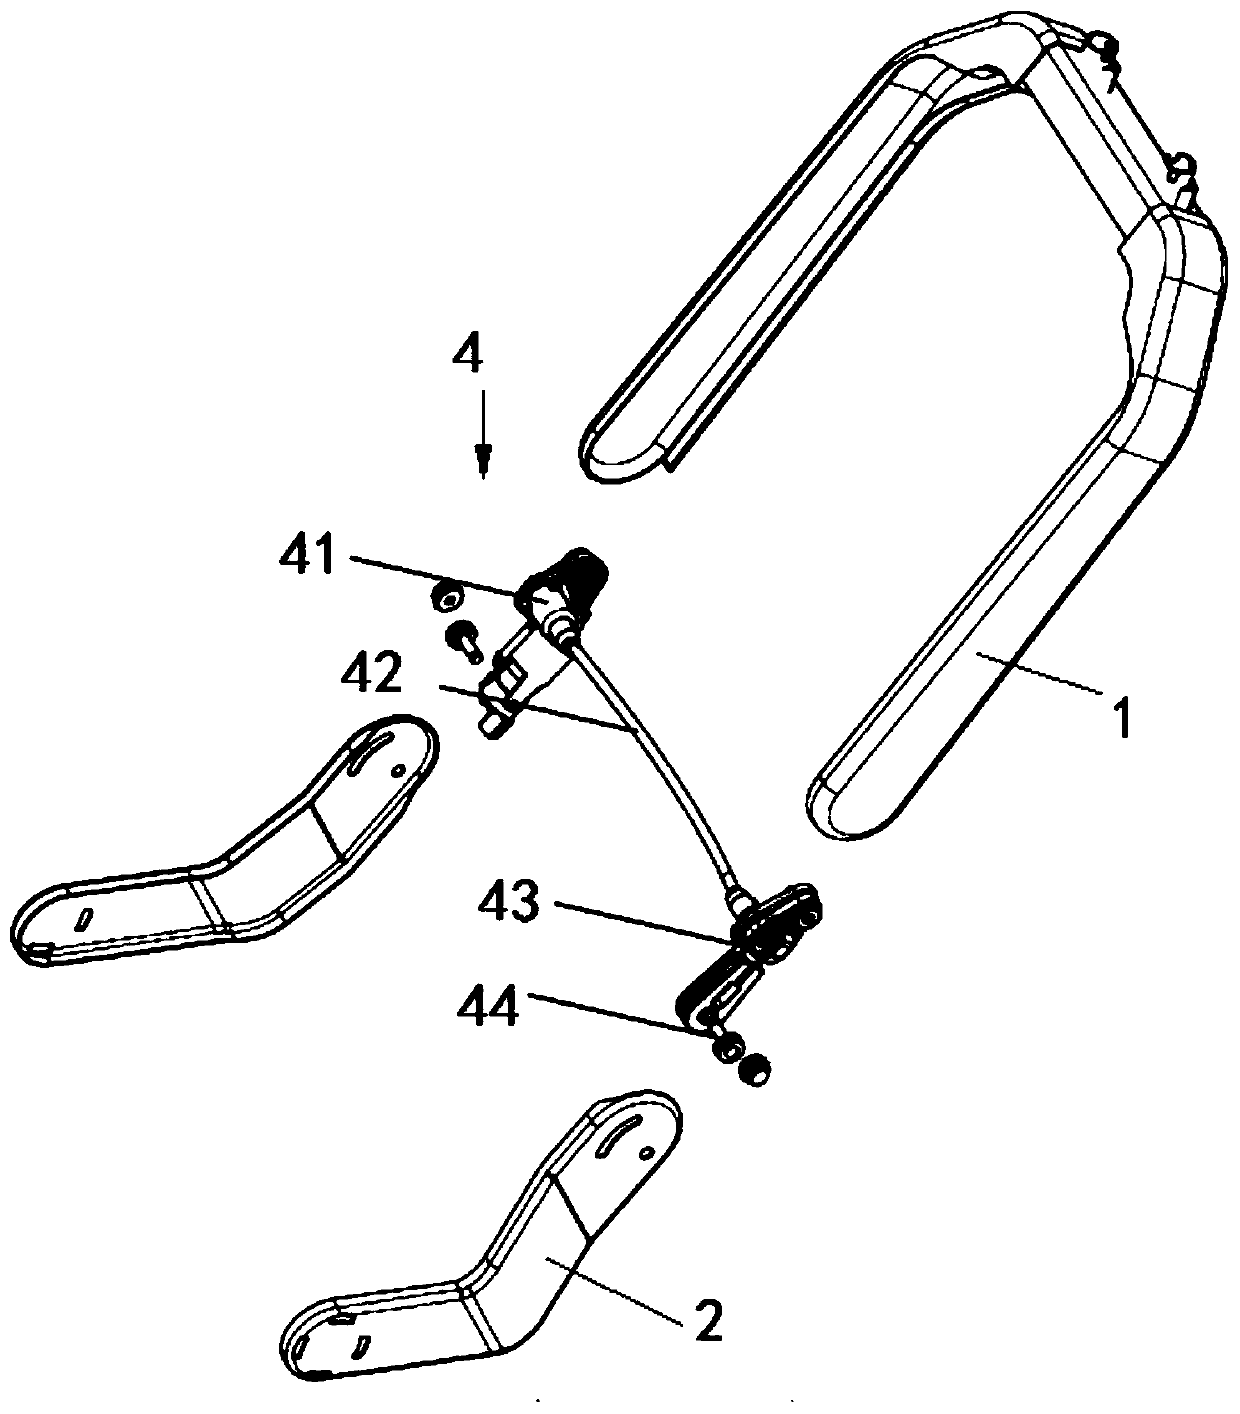 Device for improving comfort level of automobile seat and increasing sitting space